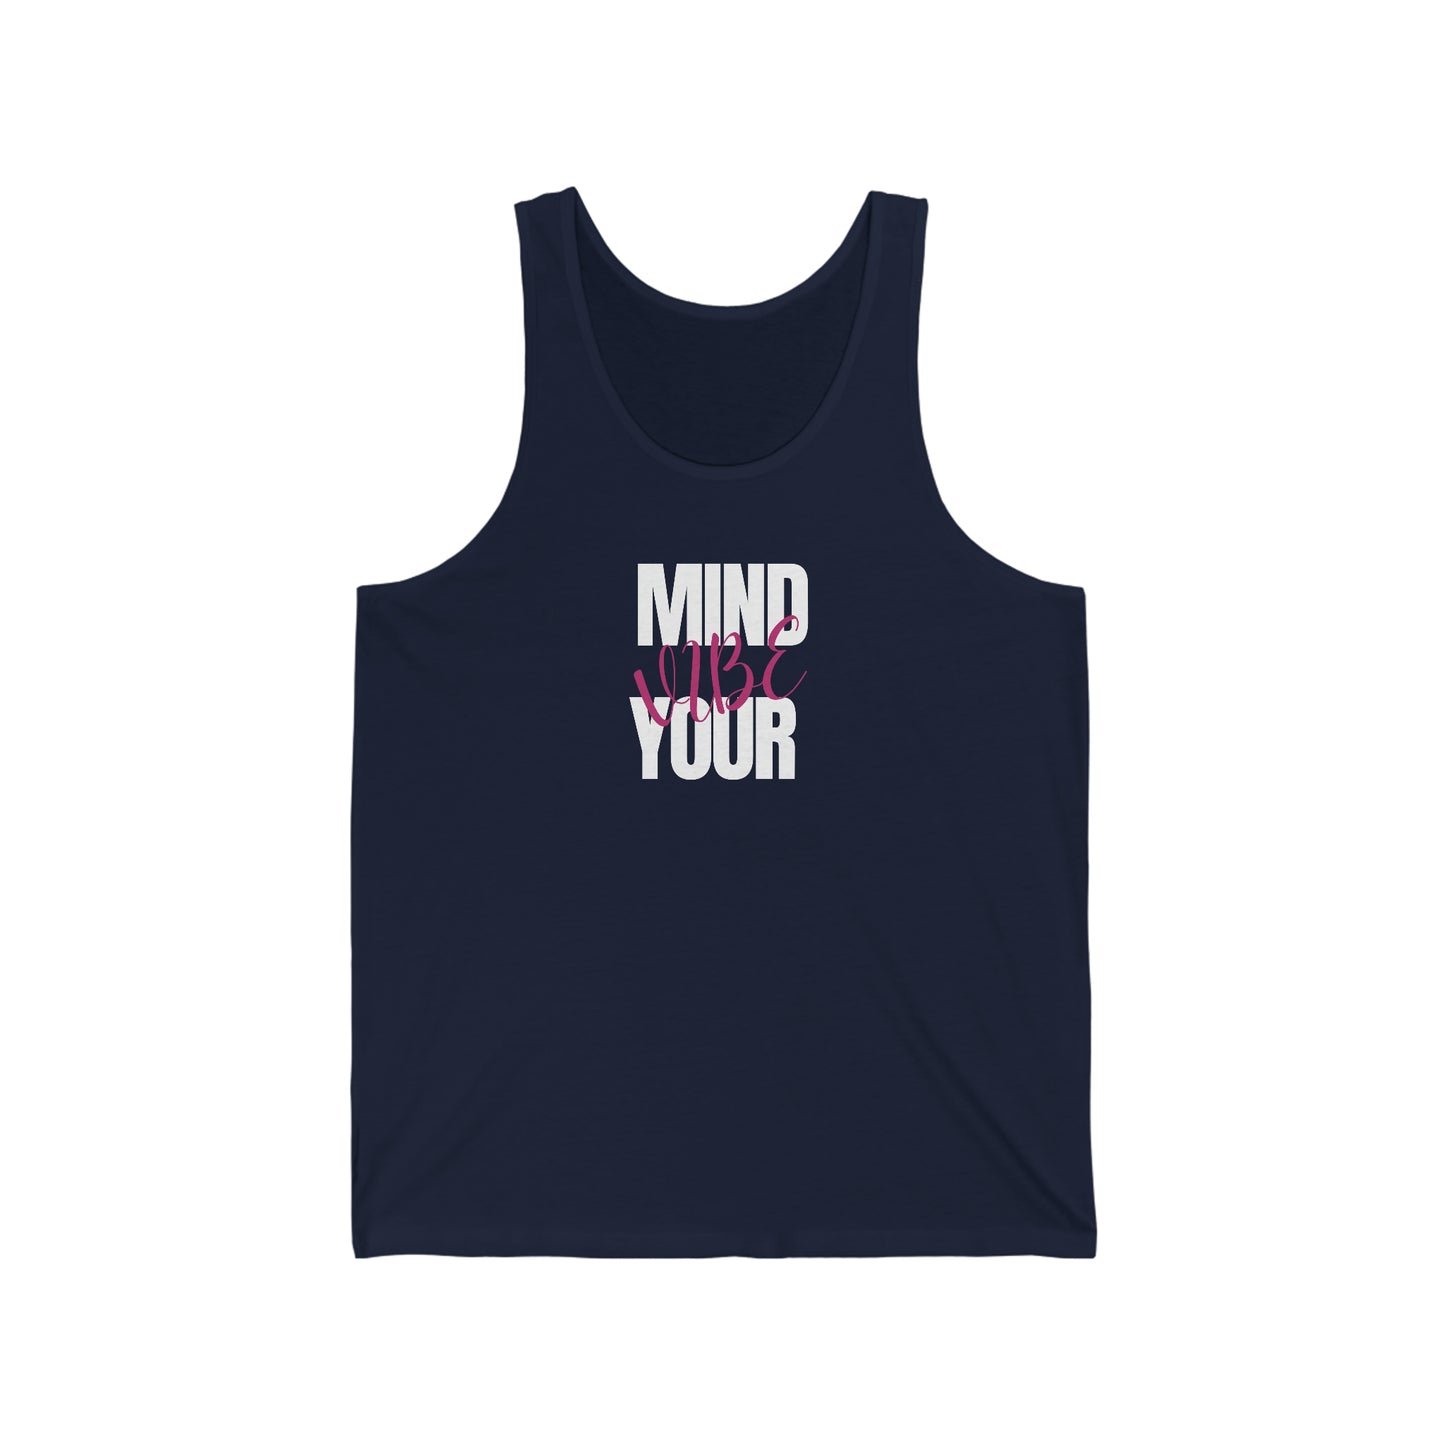 Mind Your Vibe! Jersey Tank